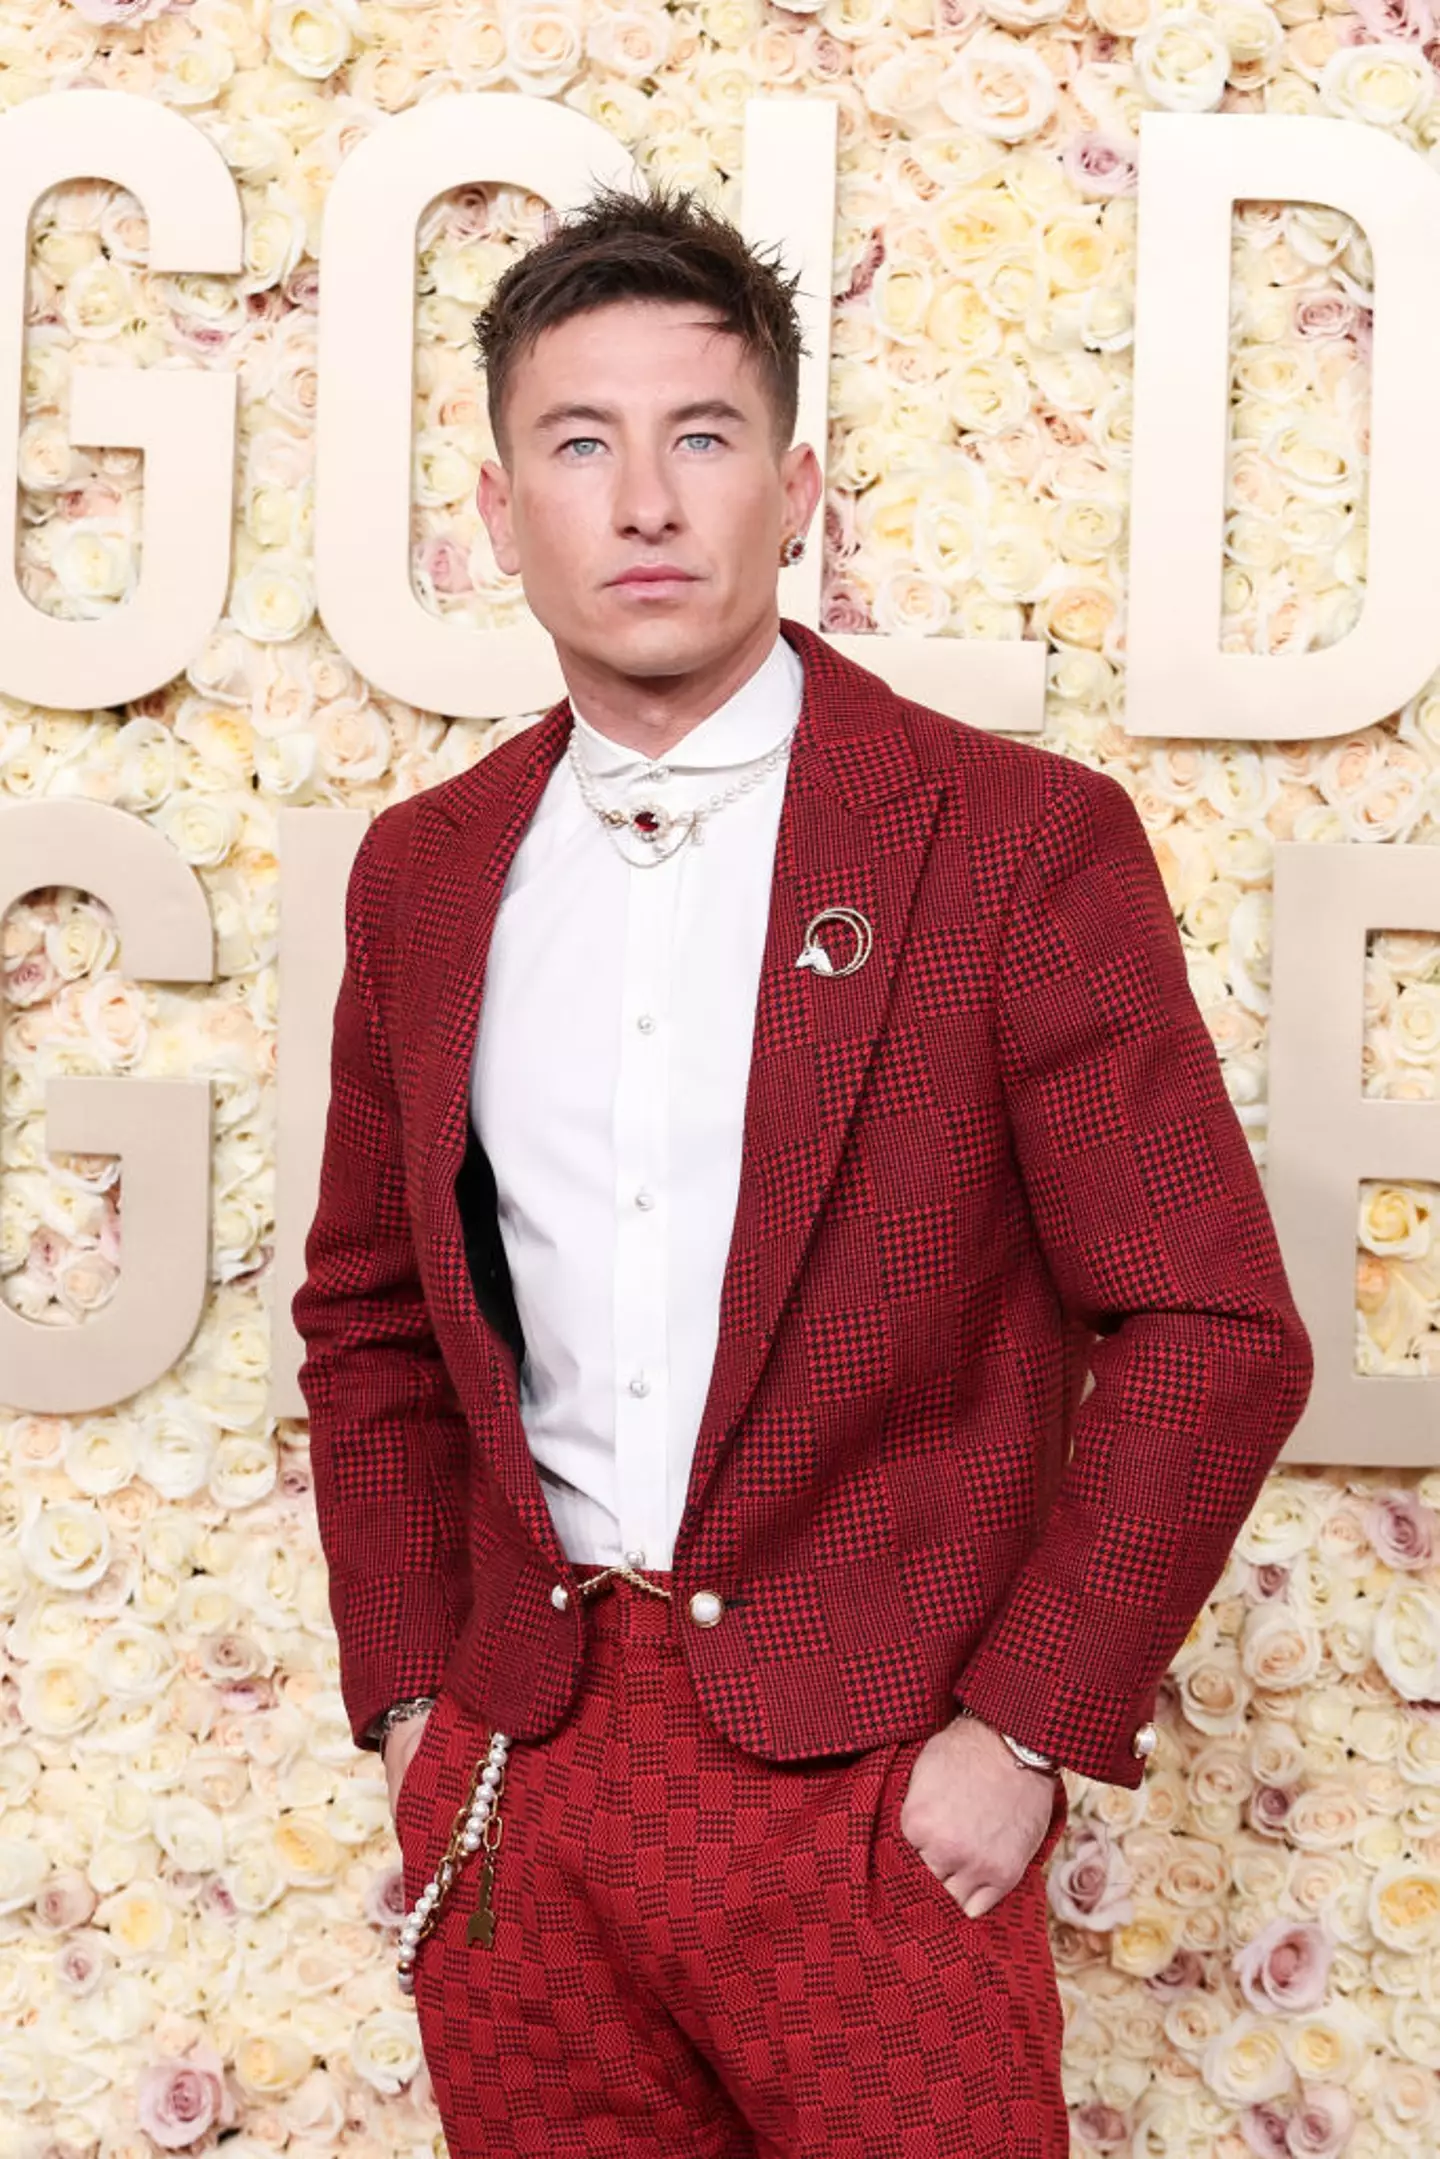 At The Golden Globes earlier this week, Barry hit the red carpet solo.